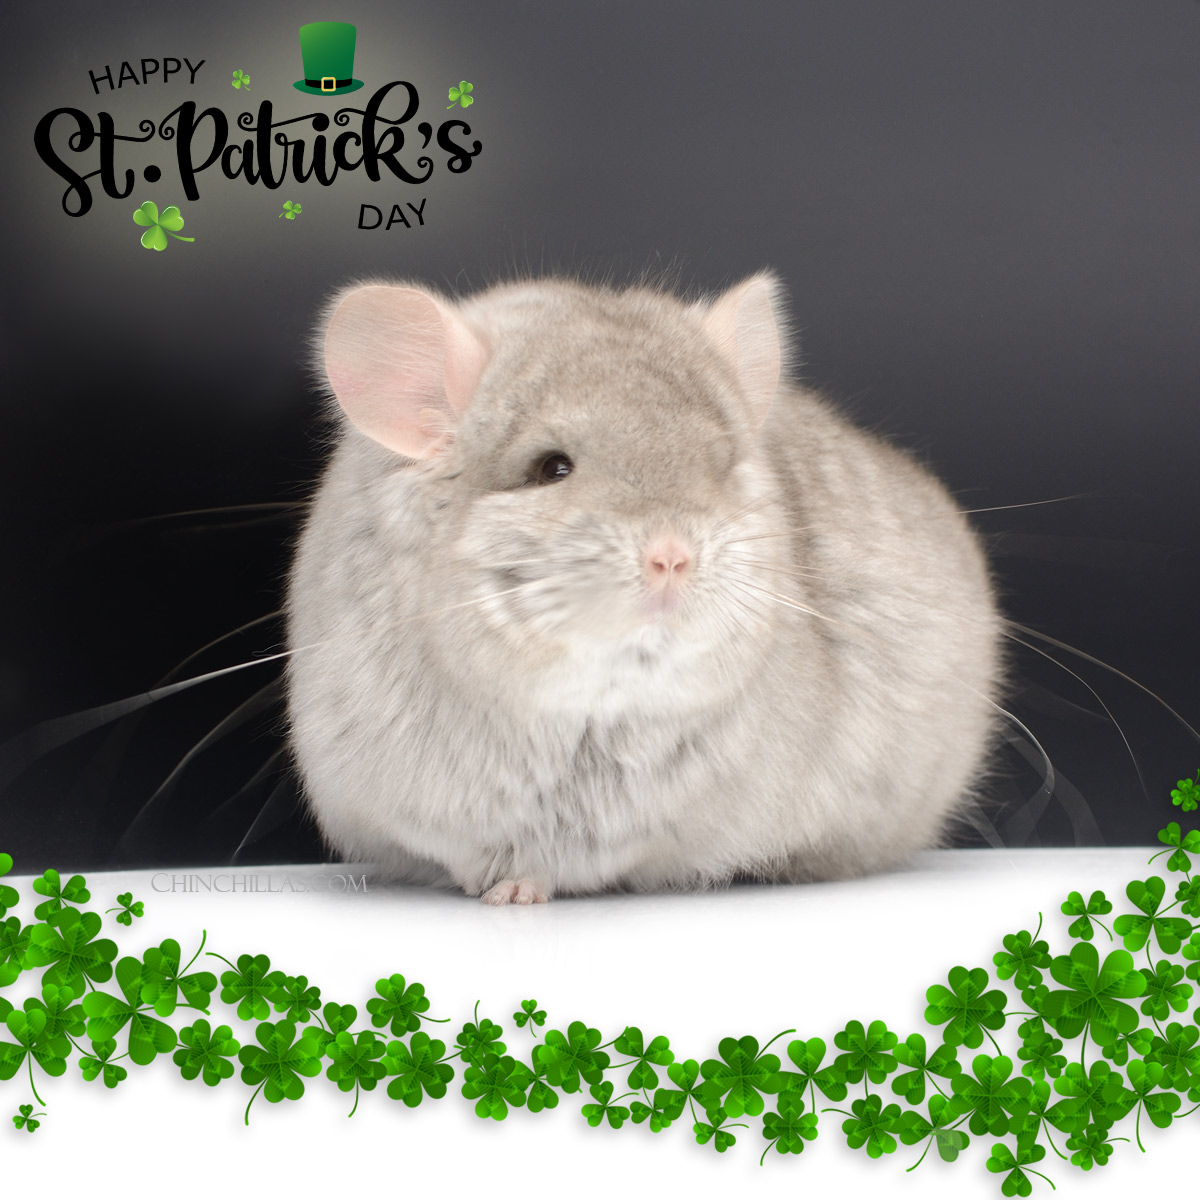 Happy St. Patrick's Day from Chinchillas.com